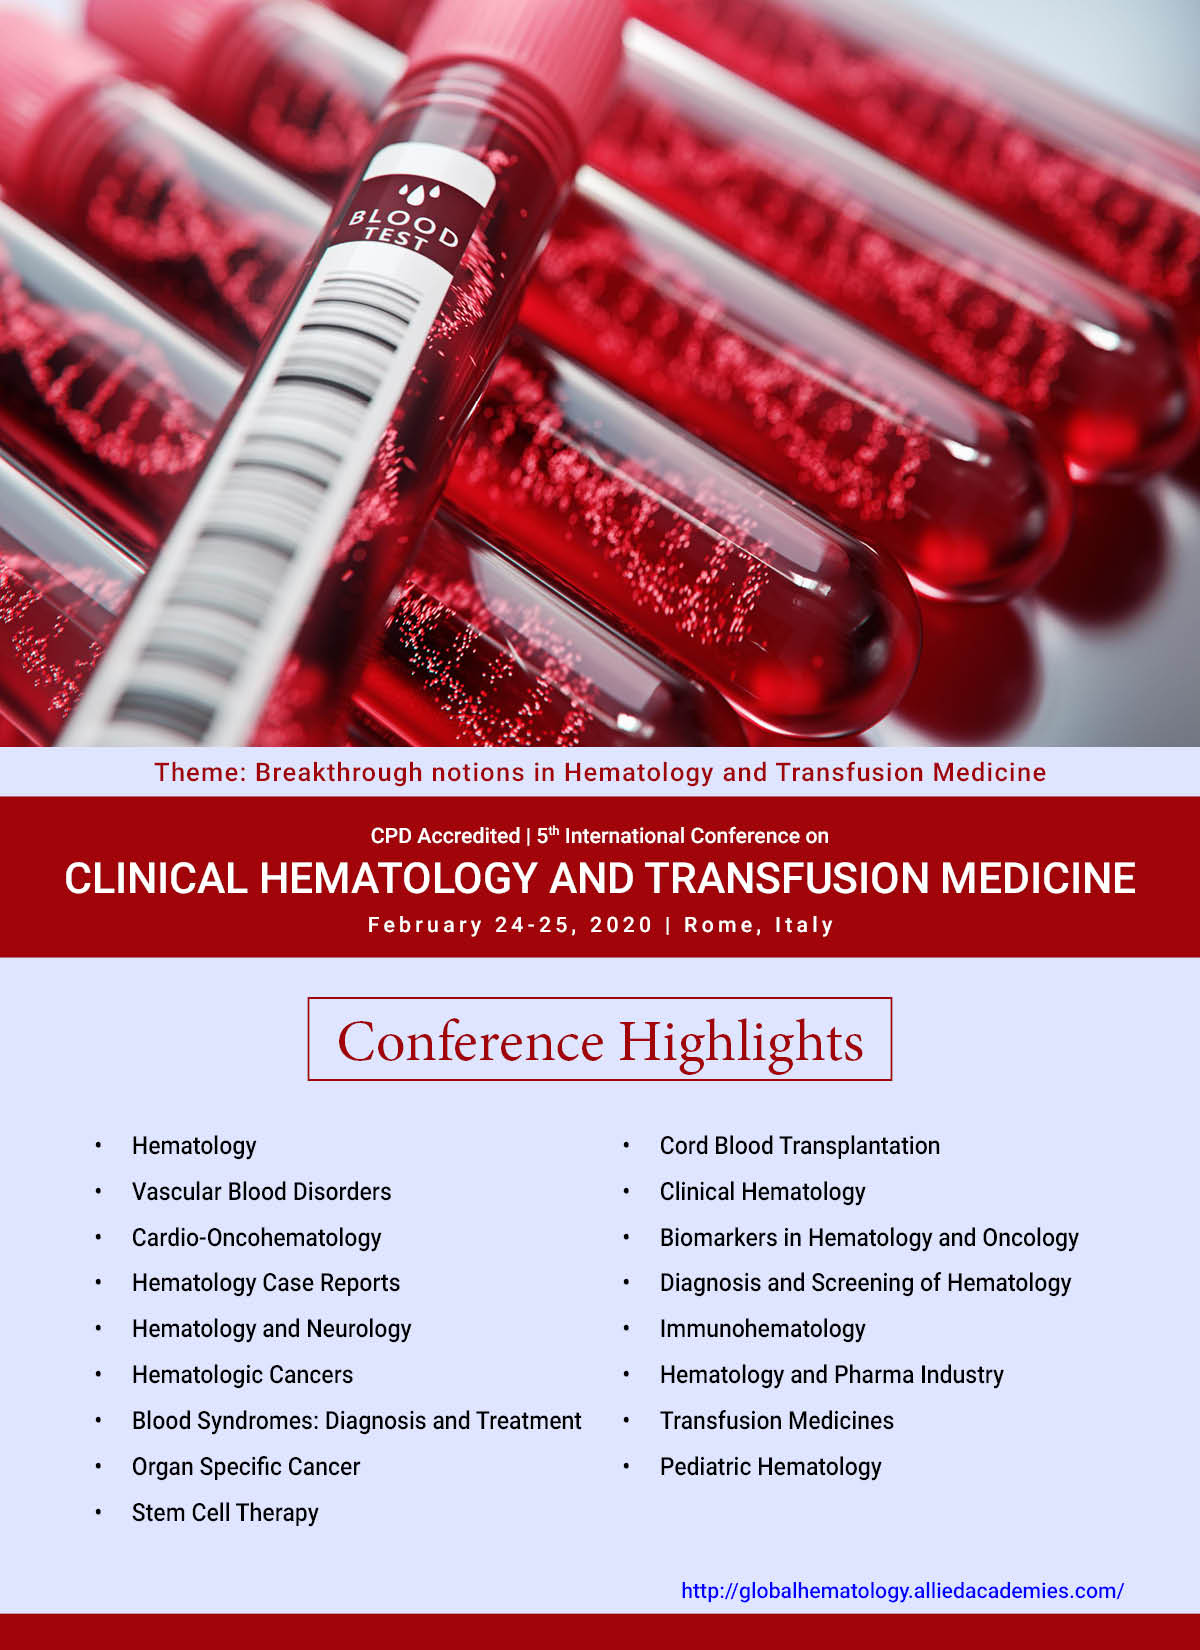 5th International Conference on Clinical Hematology and Transfusion Medicine, Rome, Italy, Romania